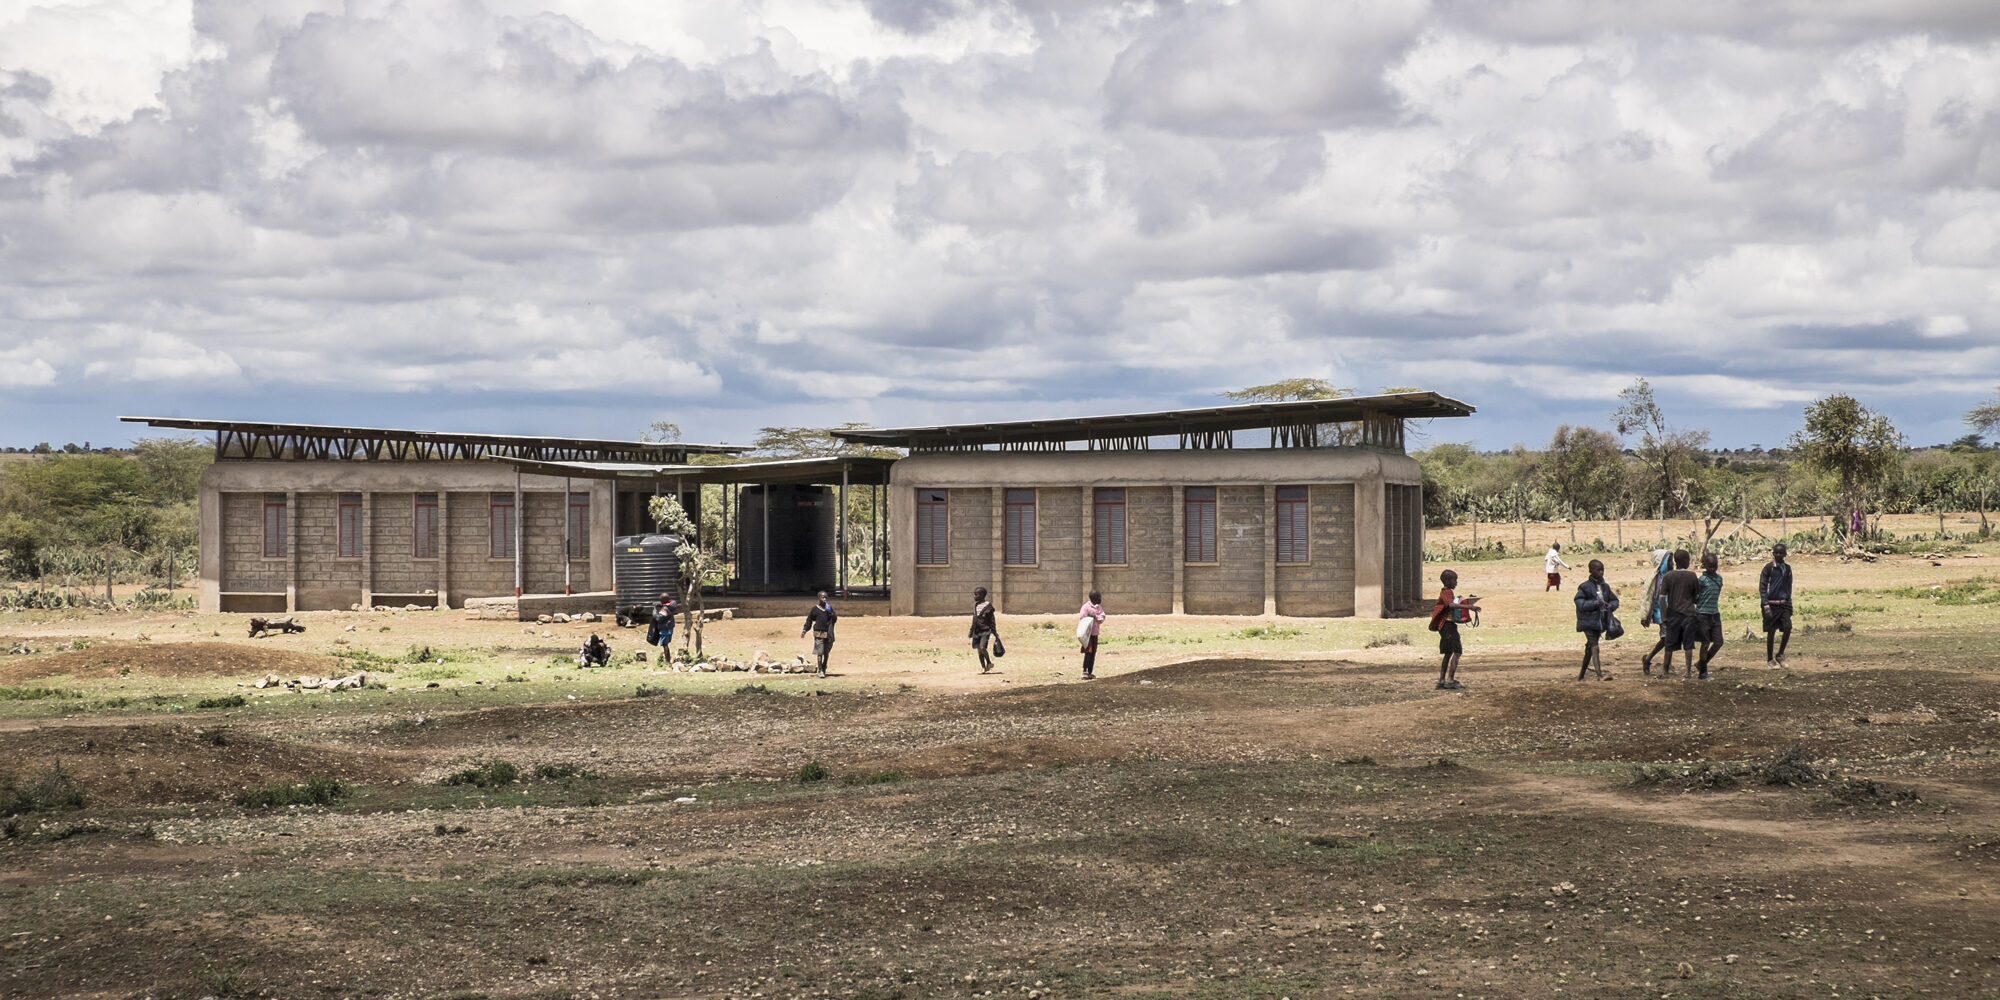 The Oleleshwa Primary School design tackles issues related to durability of Maasai nomadic construction, integration of modern materials, and a focus on natural lighting, natural ventilation, and occupant safety, while respecting the aesthetic of traditional Maasai architecture. Photo of the school from afar.